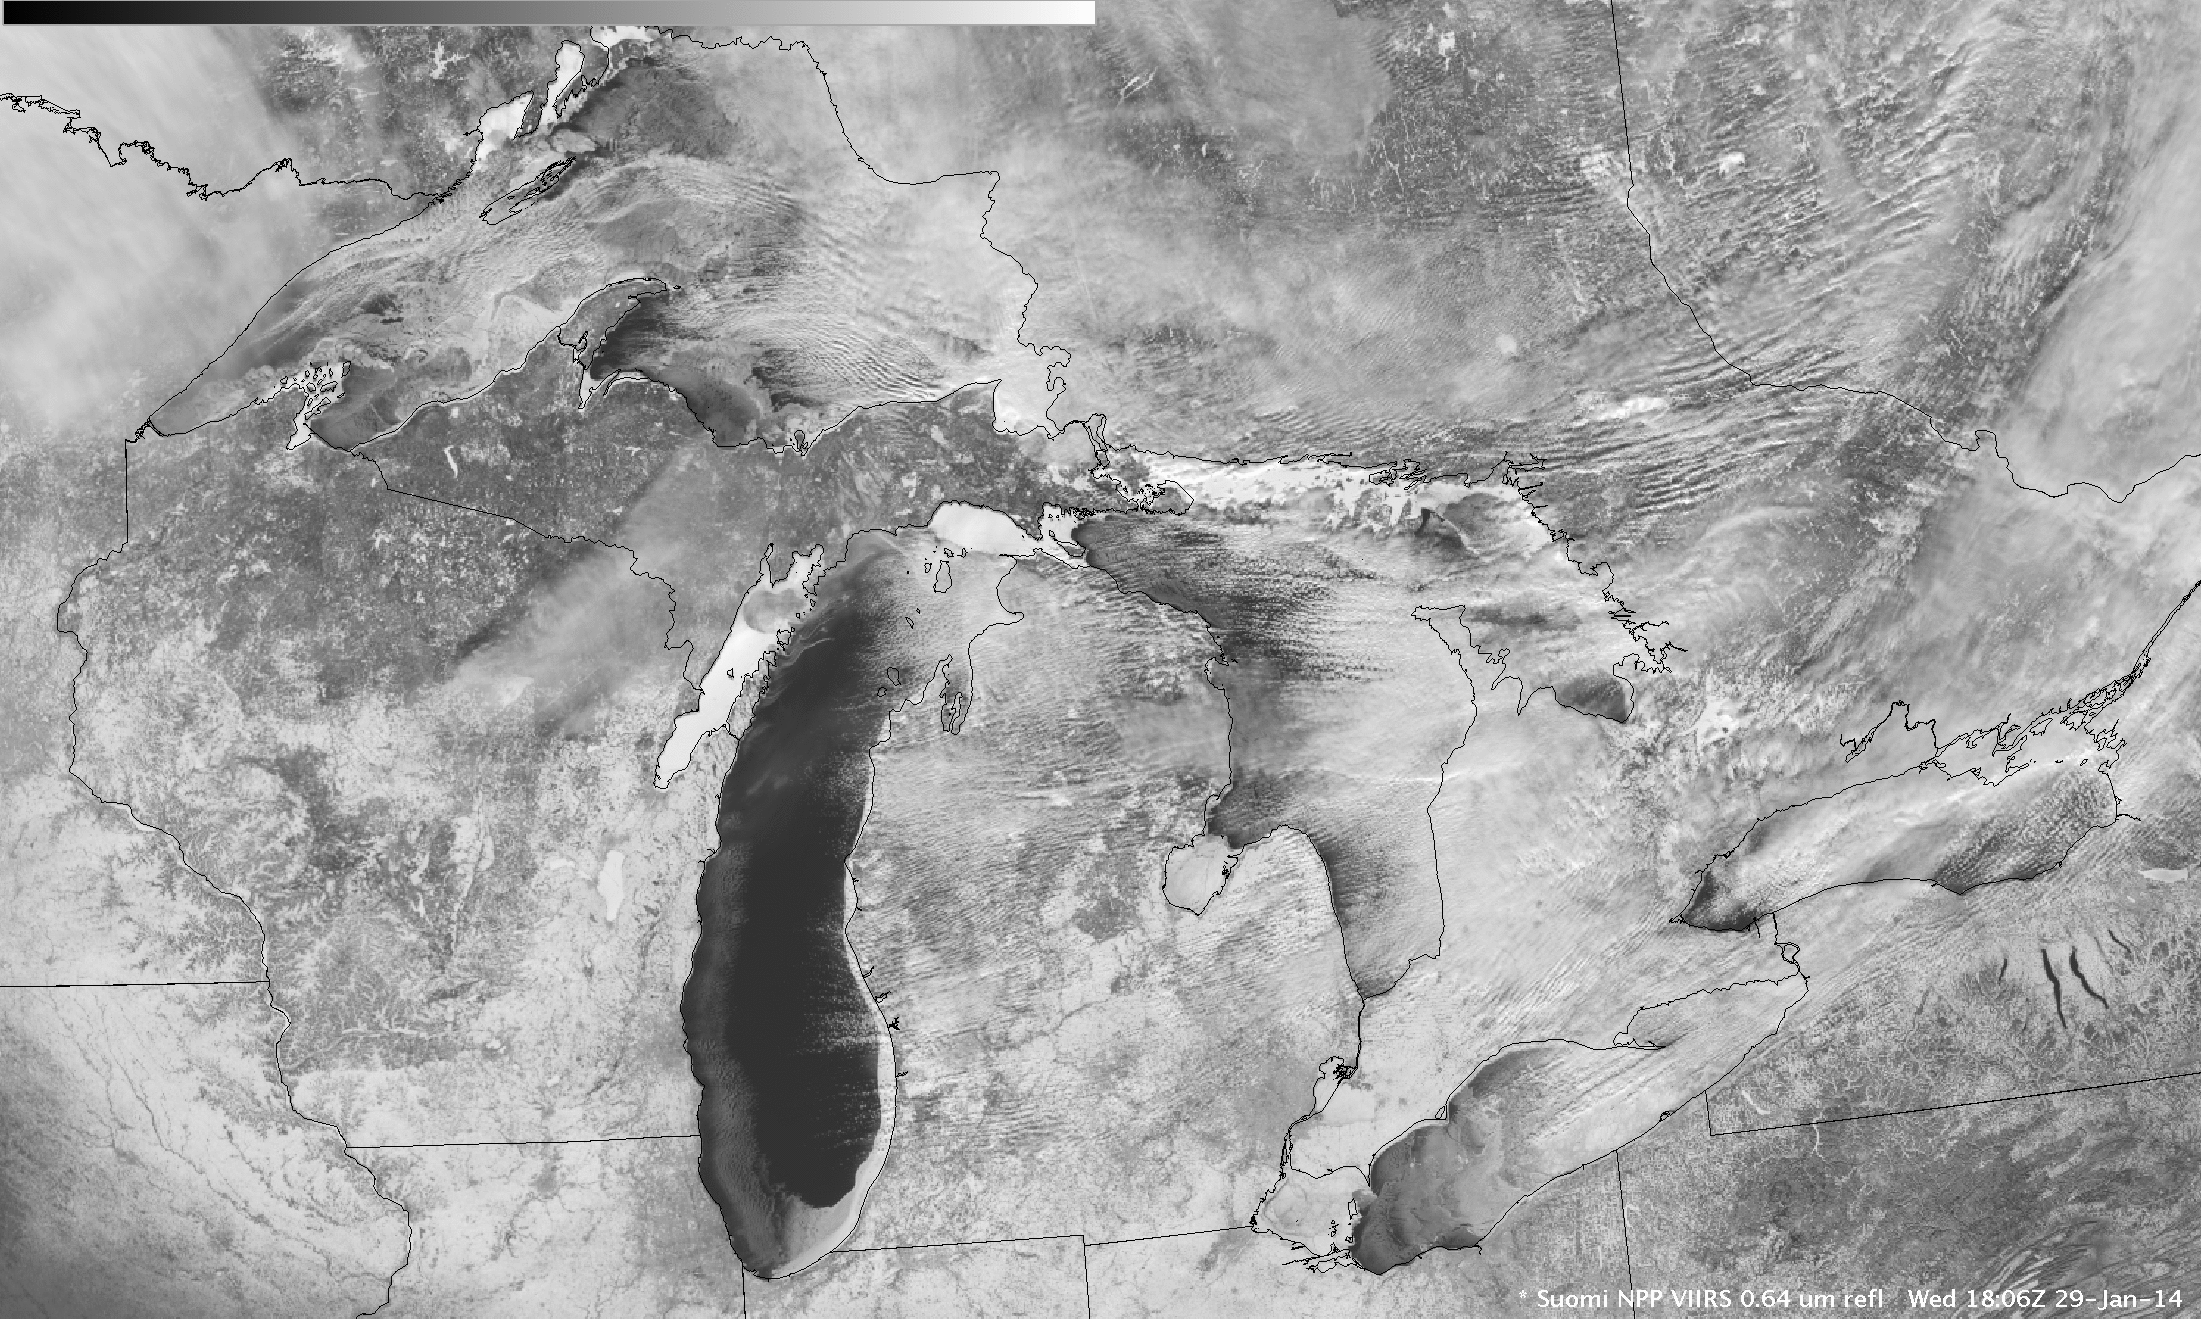 Suomi NPP VIIRS 0.64 Âµm visible channel and Snow/cloud discrimination RGB images